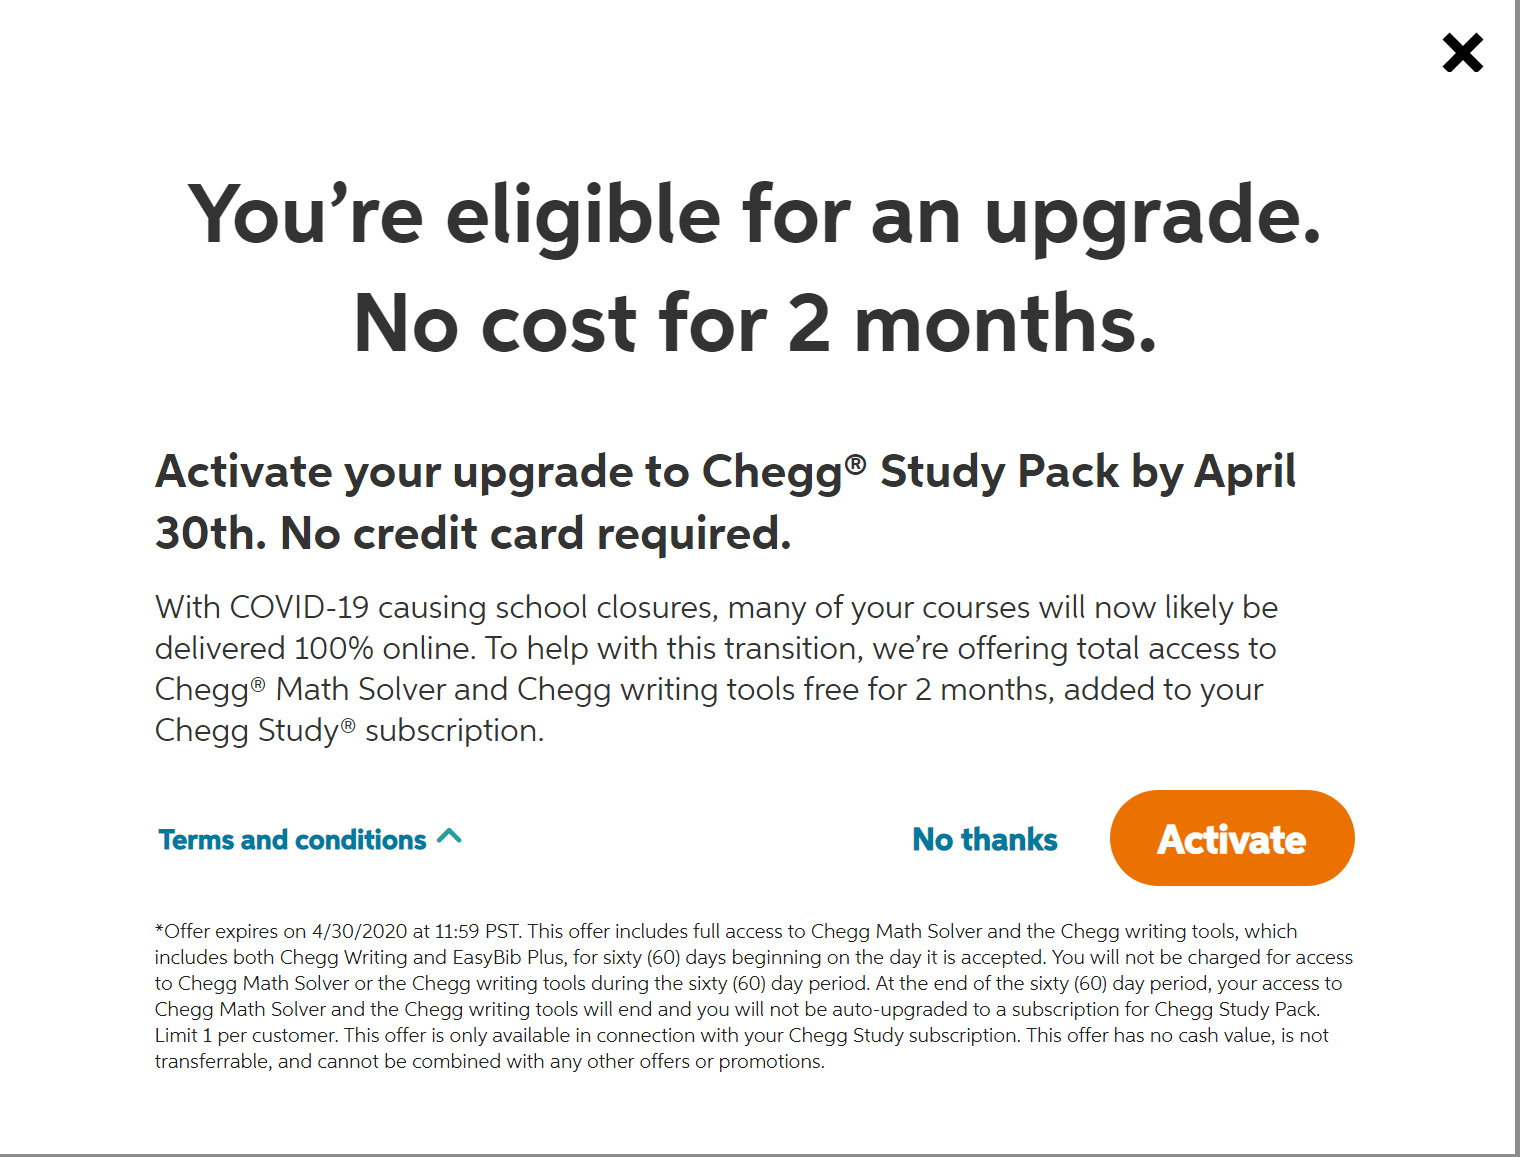 FREE: 2 month Upgrade to Chegg Study Pack for EXISTING Chegg Study Subscription